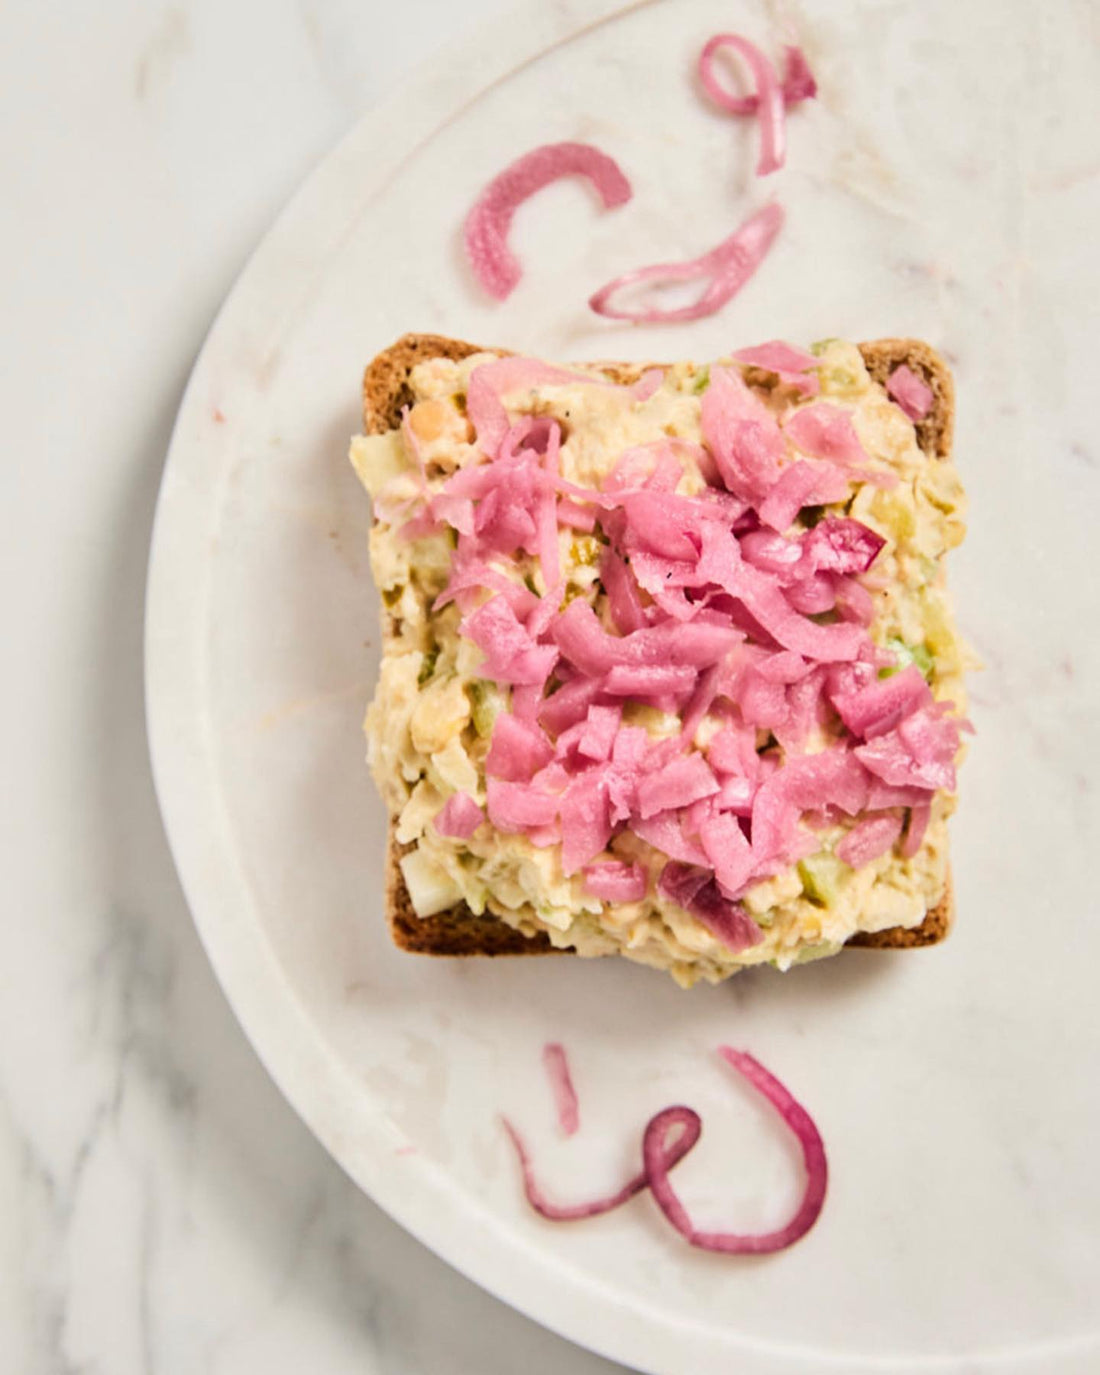 Unraveling the Controversy of Chickpea "Tuna" Salad